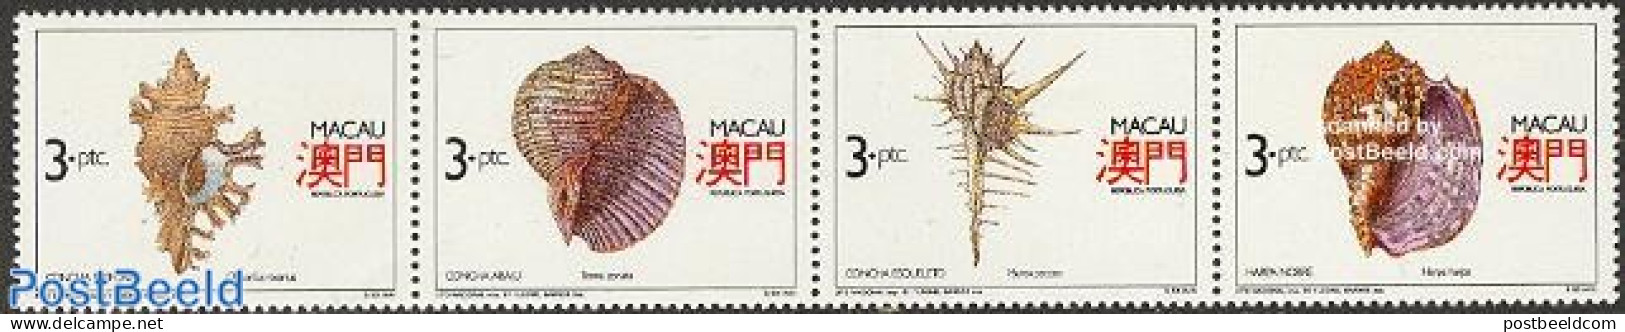 Macao 1991 Shells 4v [:::] Or [+], Mint NH, Nature - Shells & Crustaceans - Unused Stamps